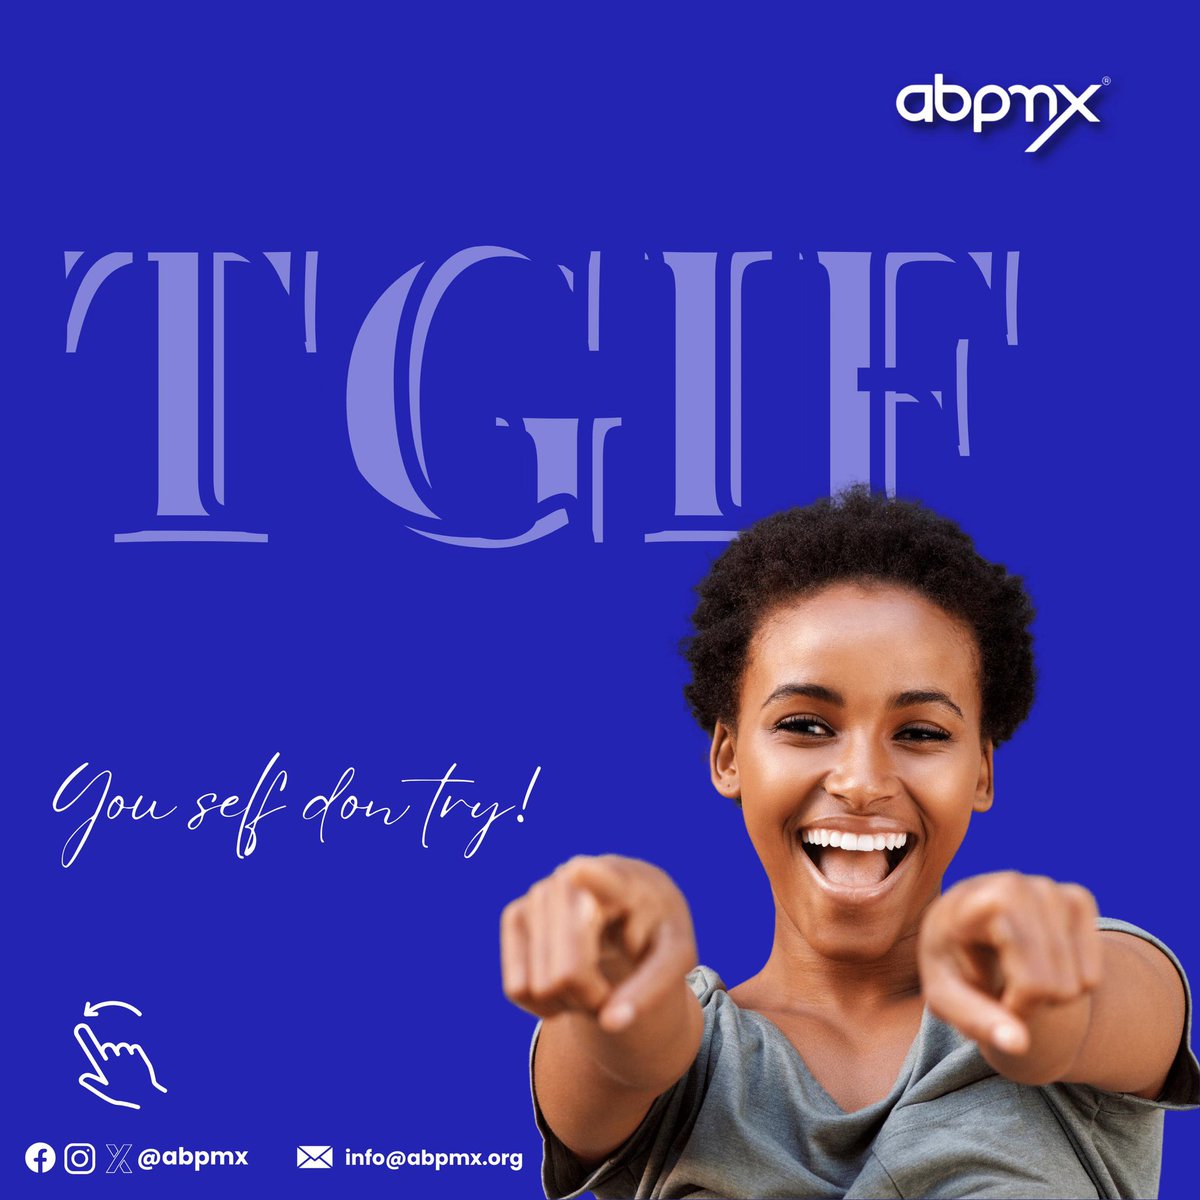 Dear Project Managers, Today which is Friday is no doubt the most exciting day of the week and our well being is as well pivot (no matter the deliverables yet to be actualized) 

Be like the “wise Jack” that worked hard and played hard. 

See you on Monday again. 

#ABPMX #ABPMX